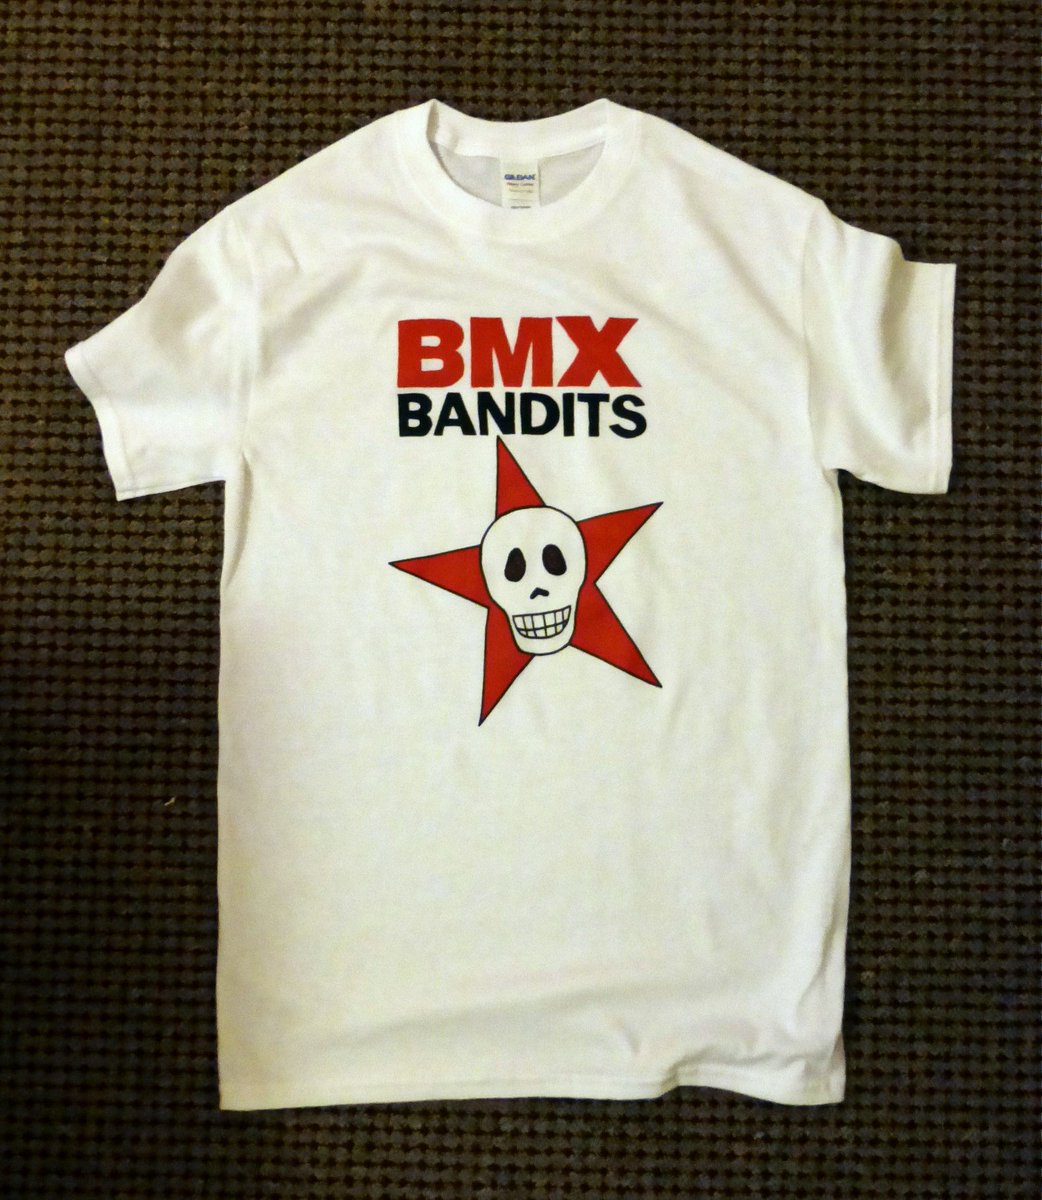 Duglas T Stewart Bmx Bandits Have Merchandise T Shirts Limited Edition Screen Printed Reproduction Of A 1986 Concert Poster T Co Plgldwdlb3